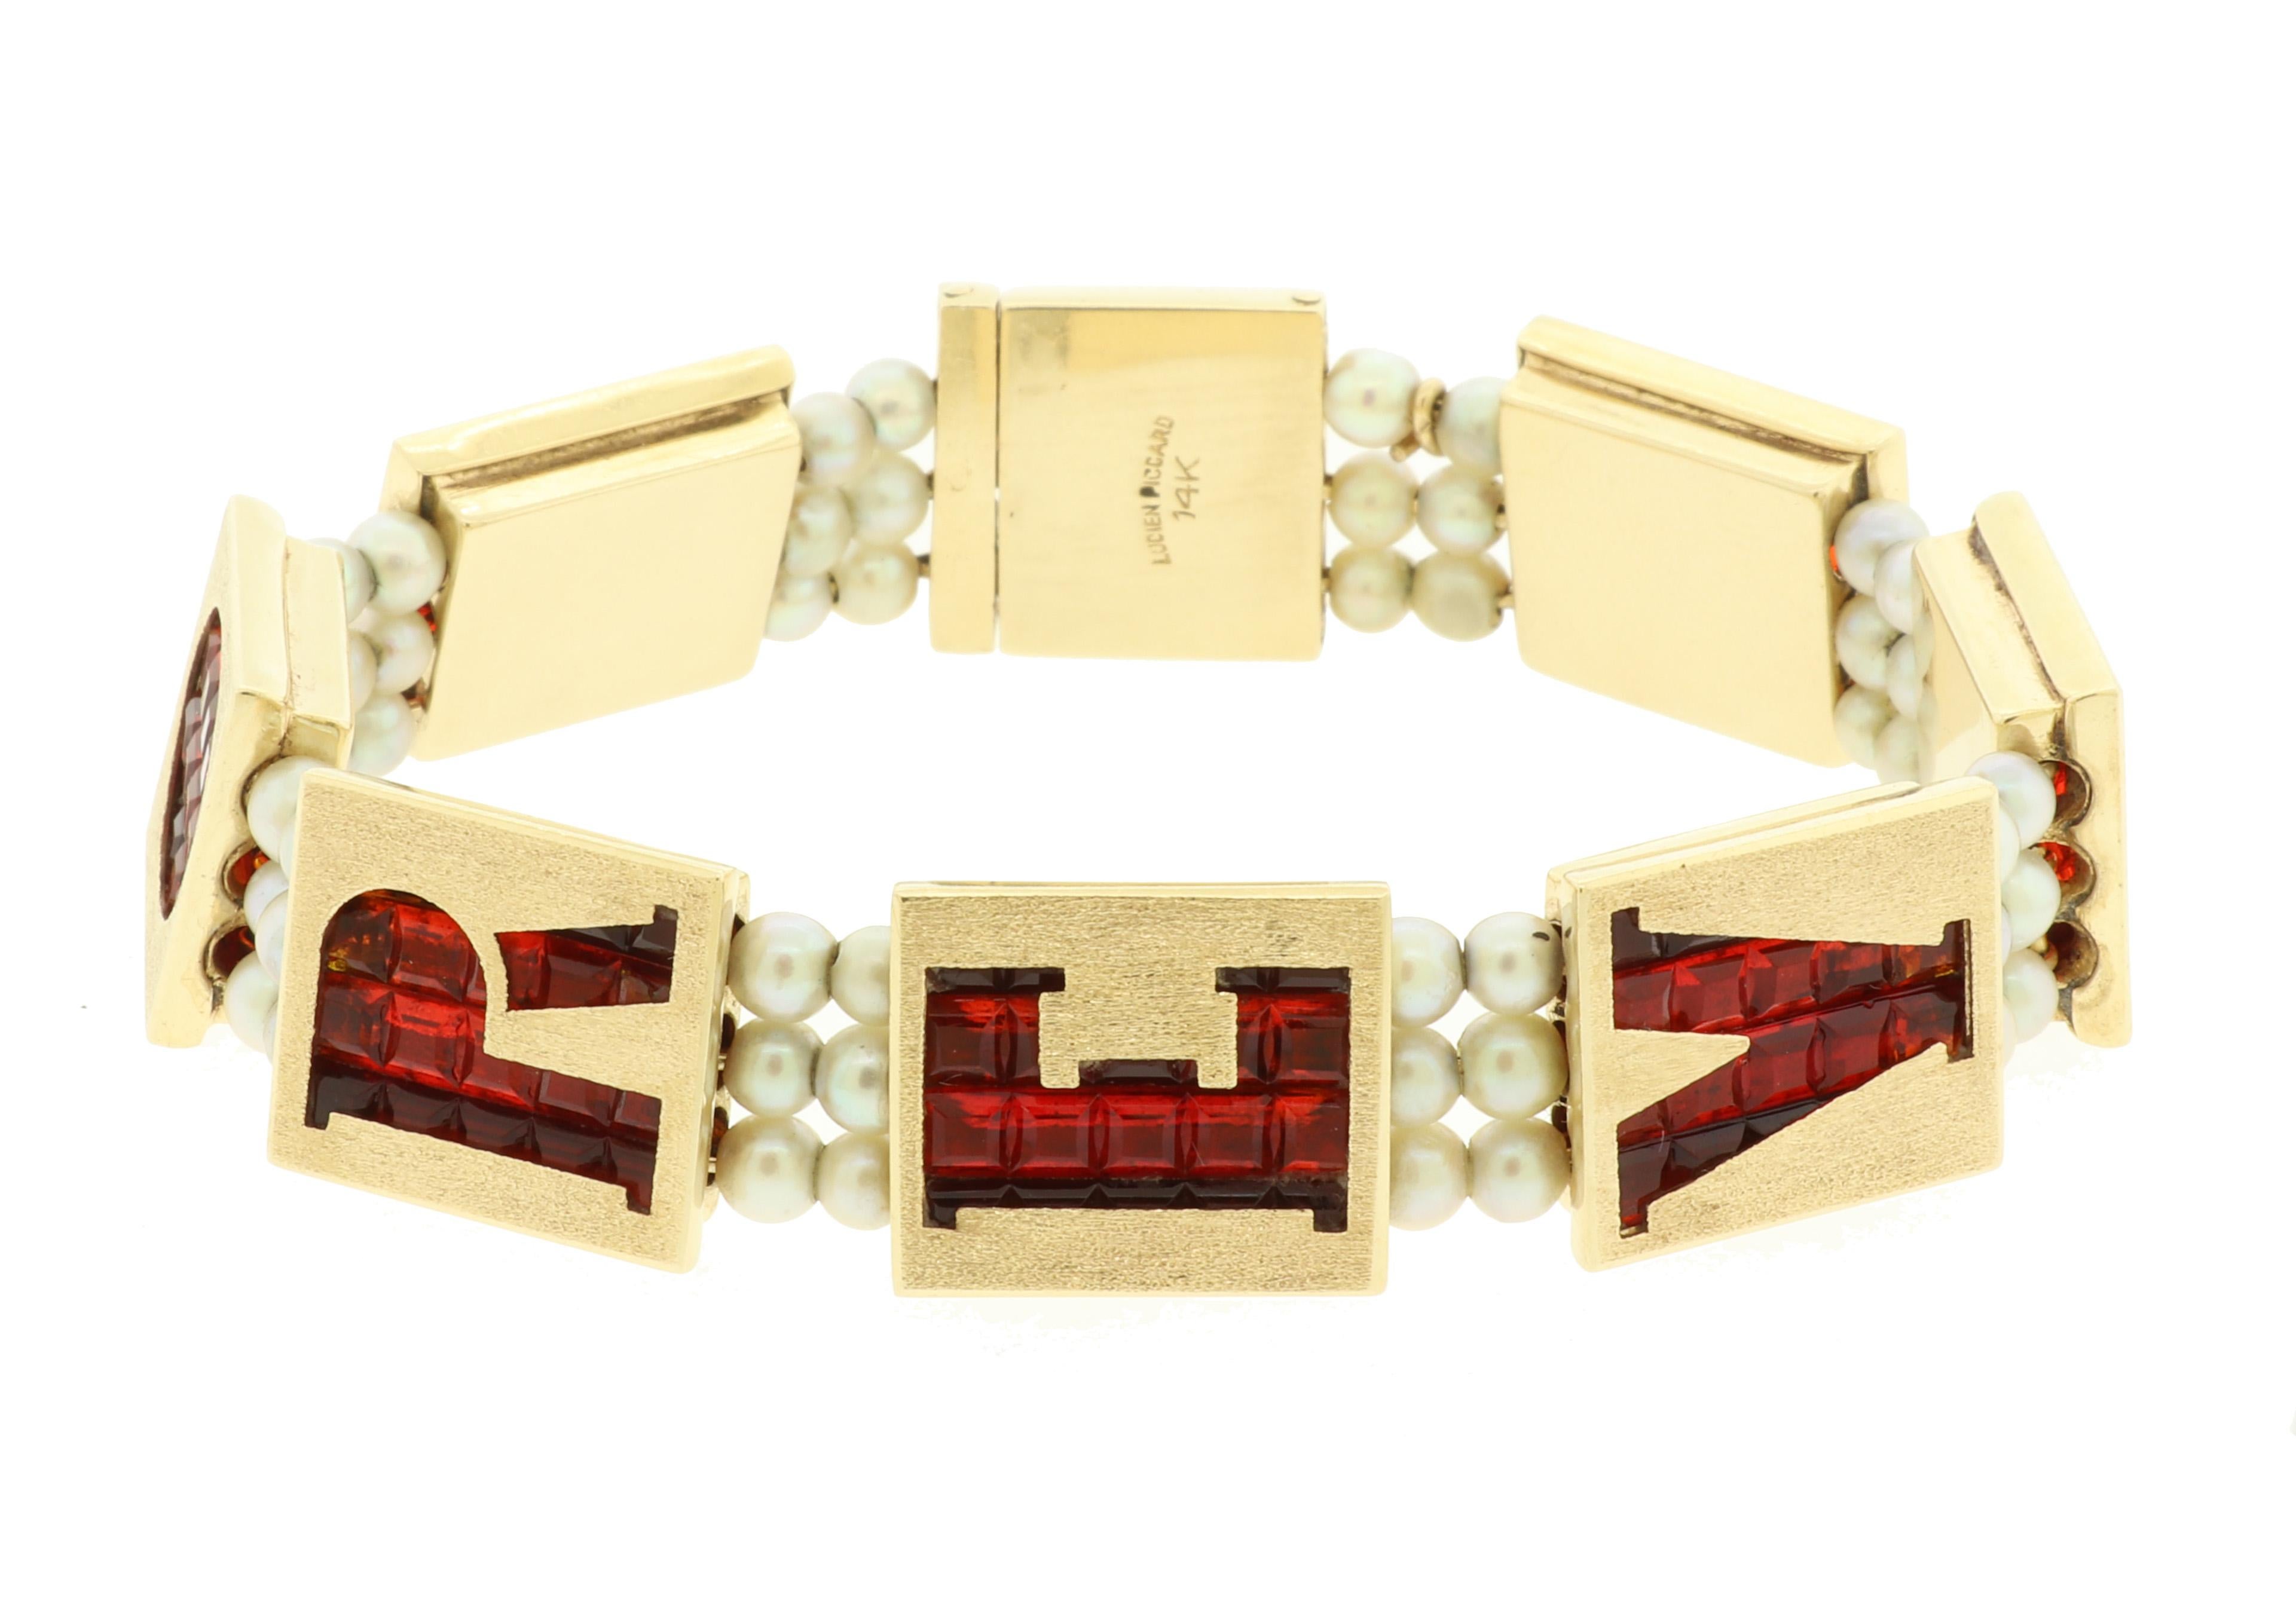 This bracelet is one of the rarest designs by Lucien Piccard. It is the 